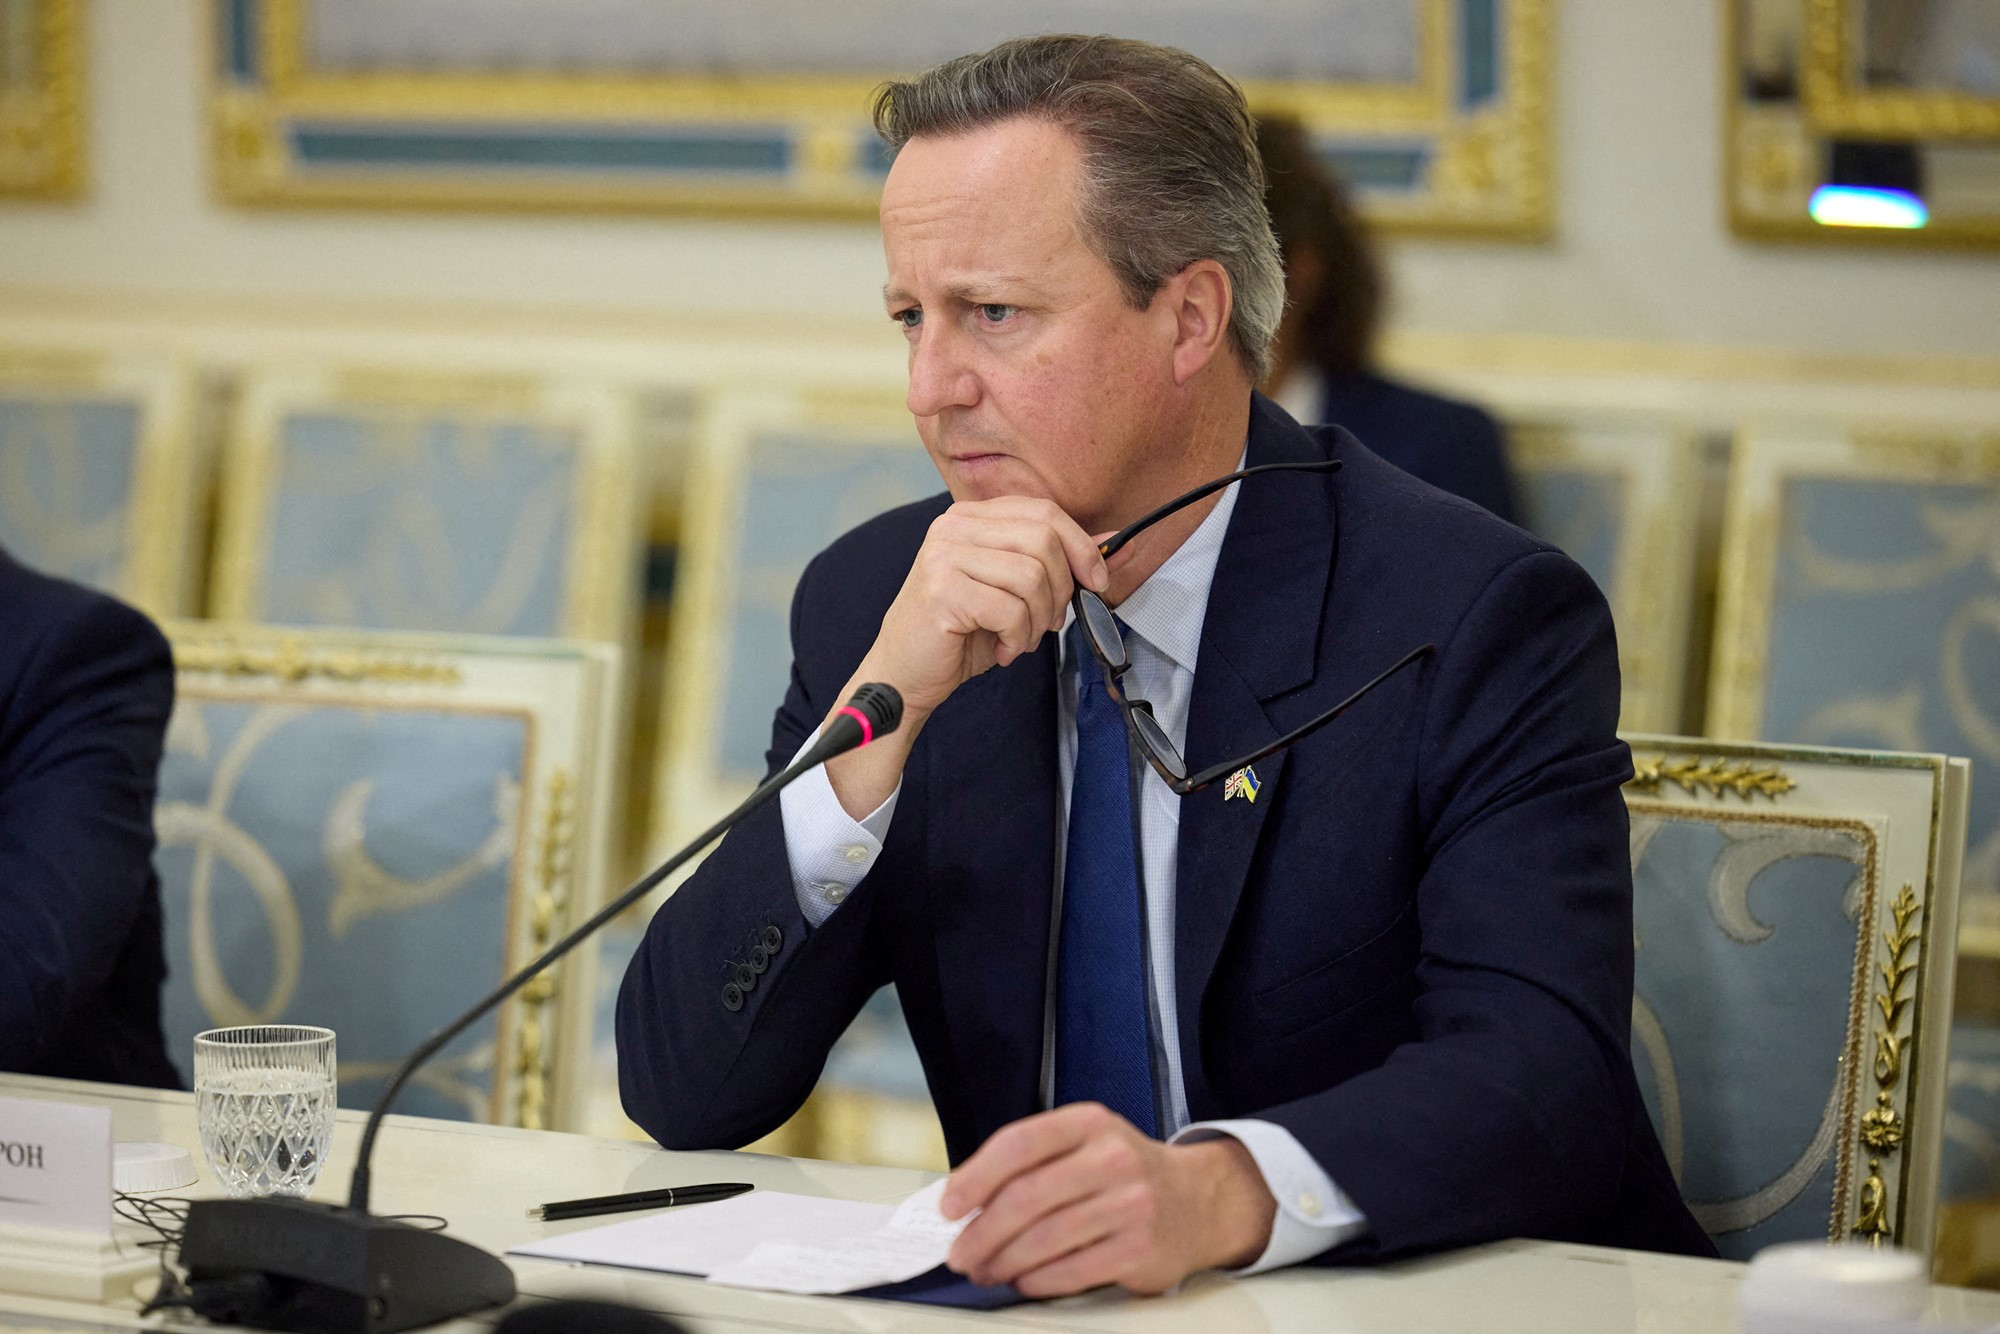 David Cameron sits in front of a microphone with a thoughtful expression